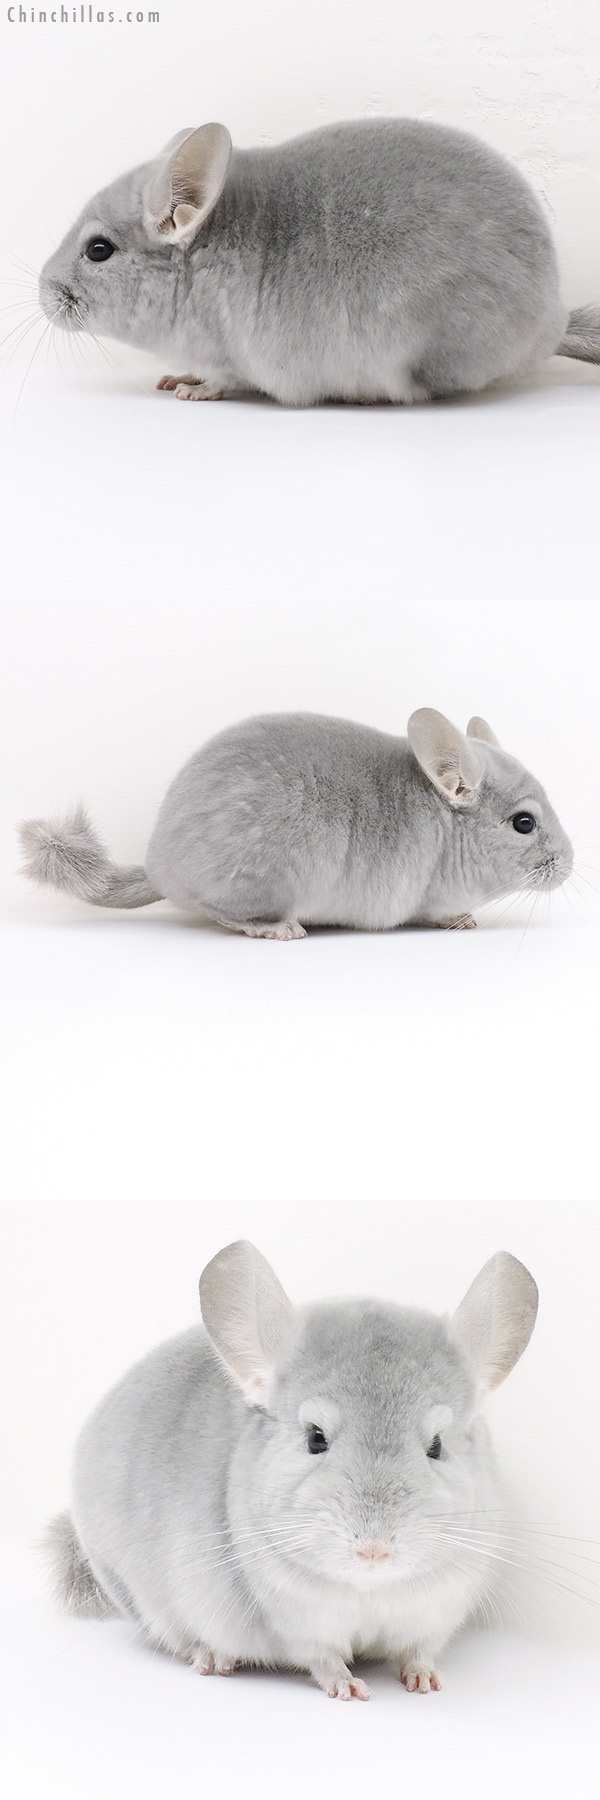 Chinchilla or related item offered for sale or export on Chinchillas.com - 16300 Premium Production Quality Blue Diamond Female Chinchilla